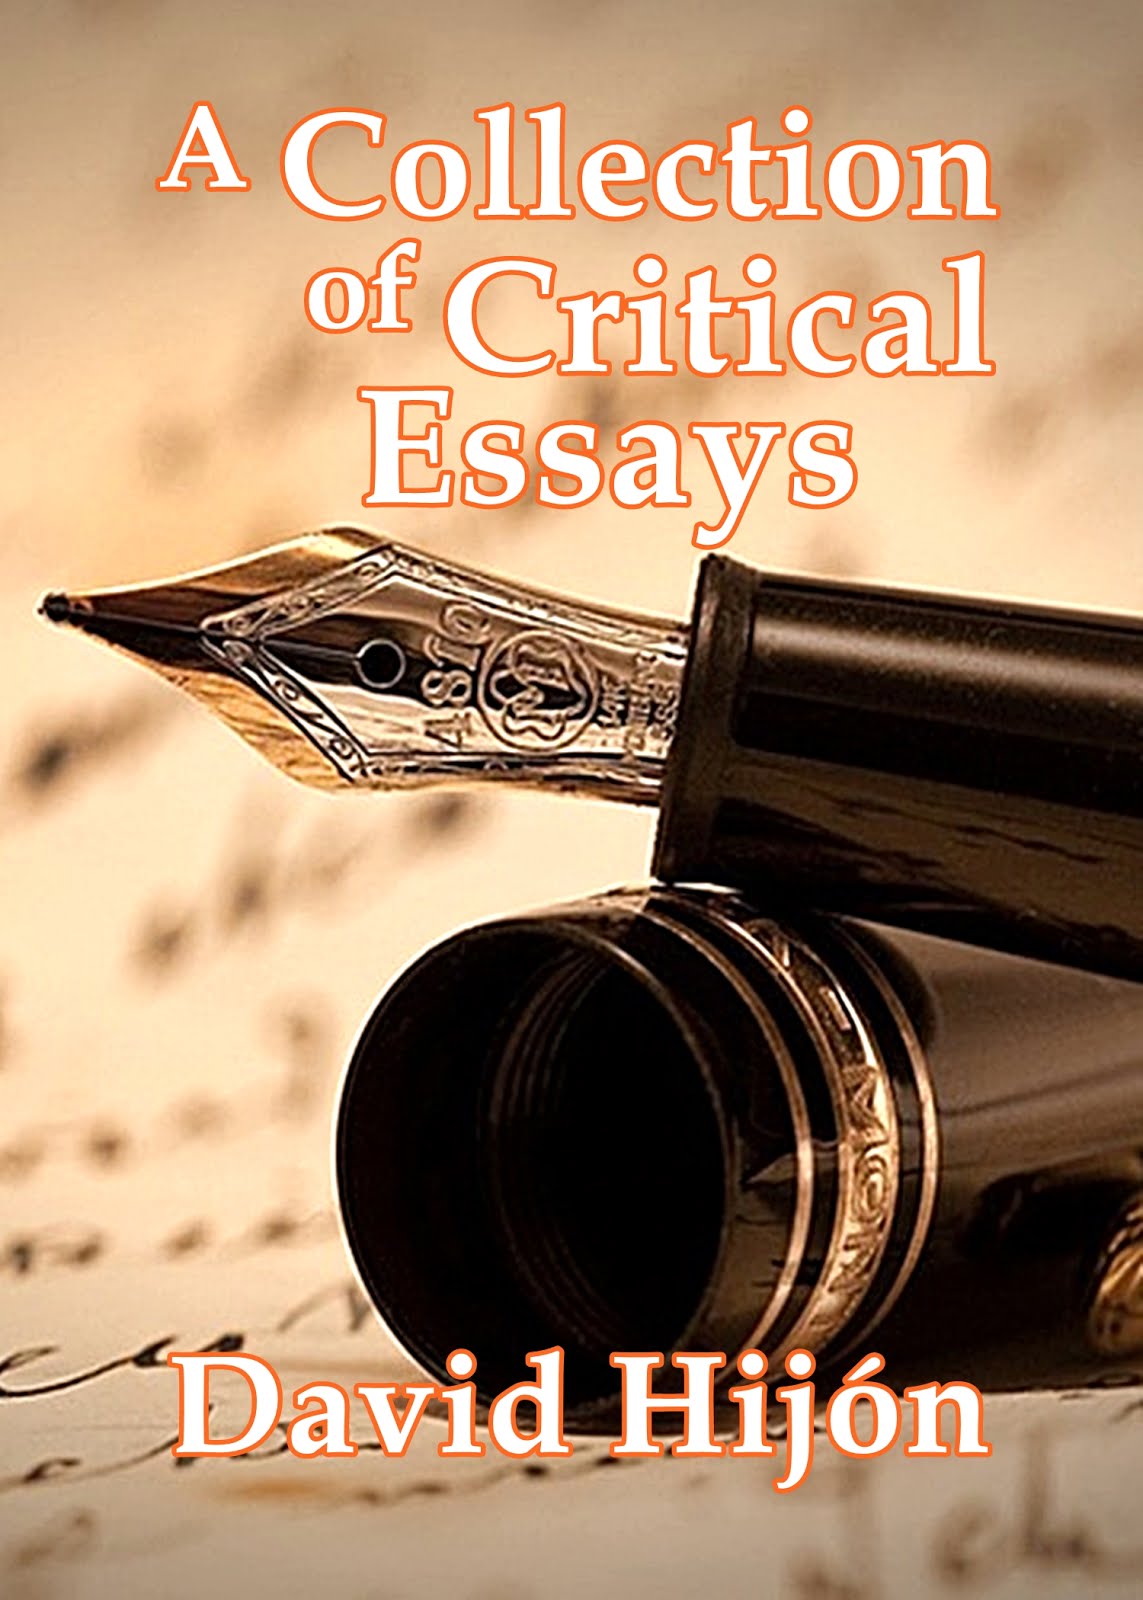 A Collection of Critical Essays